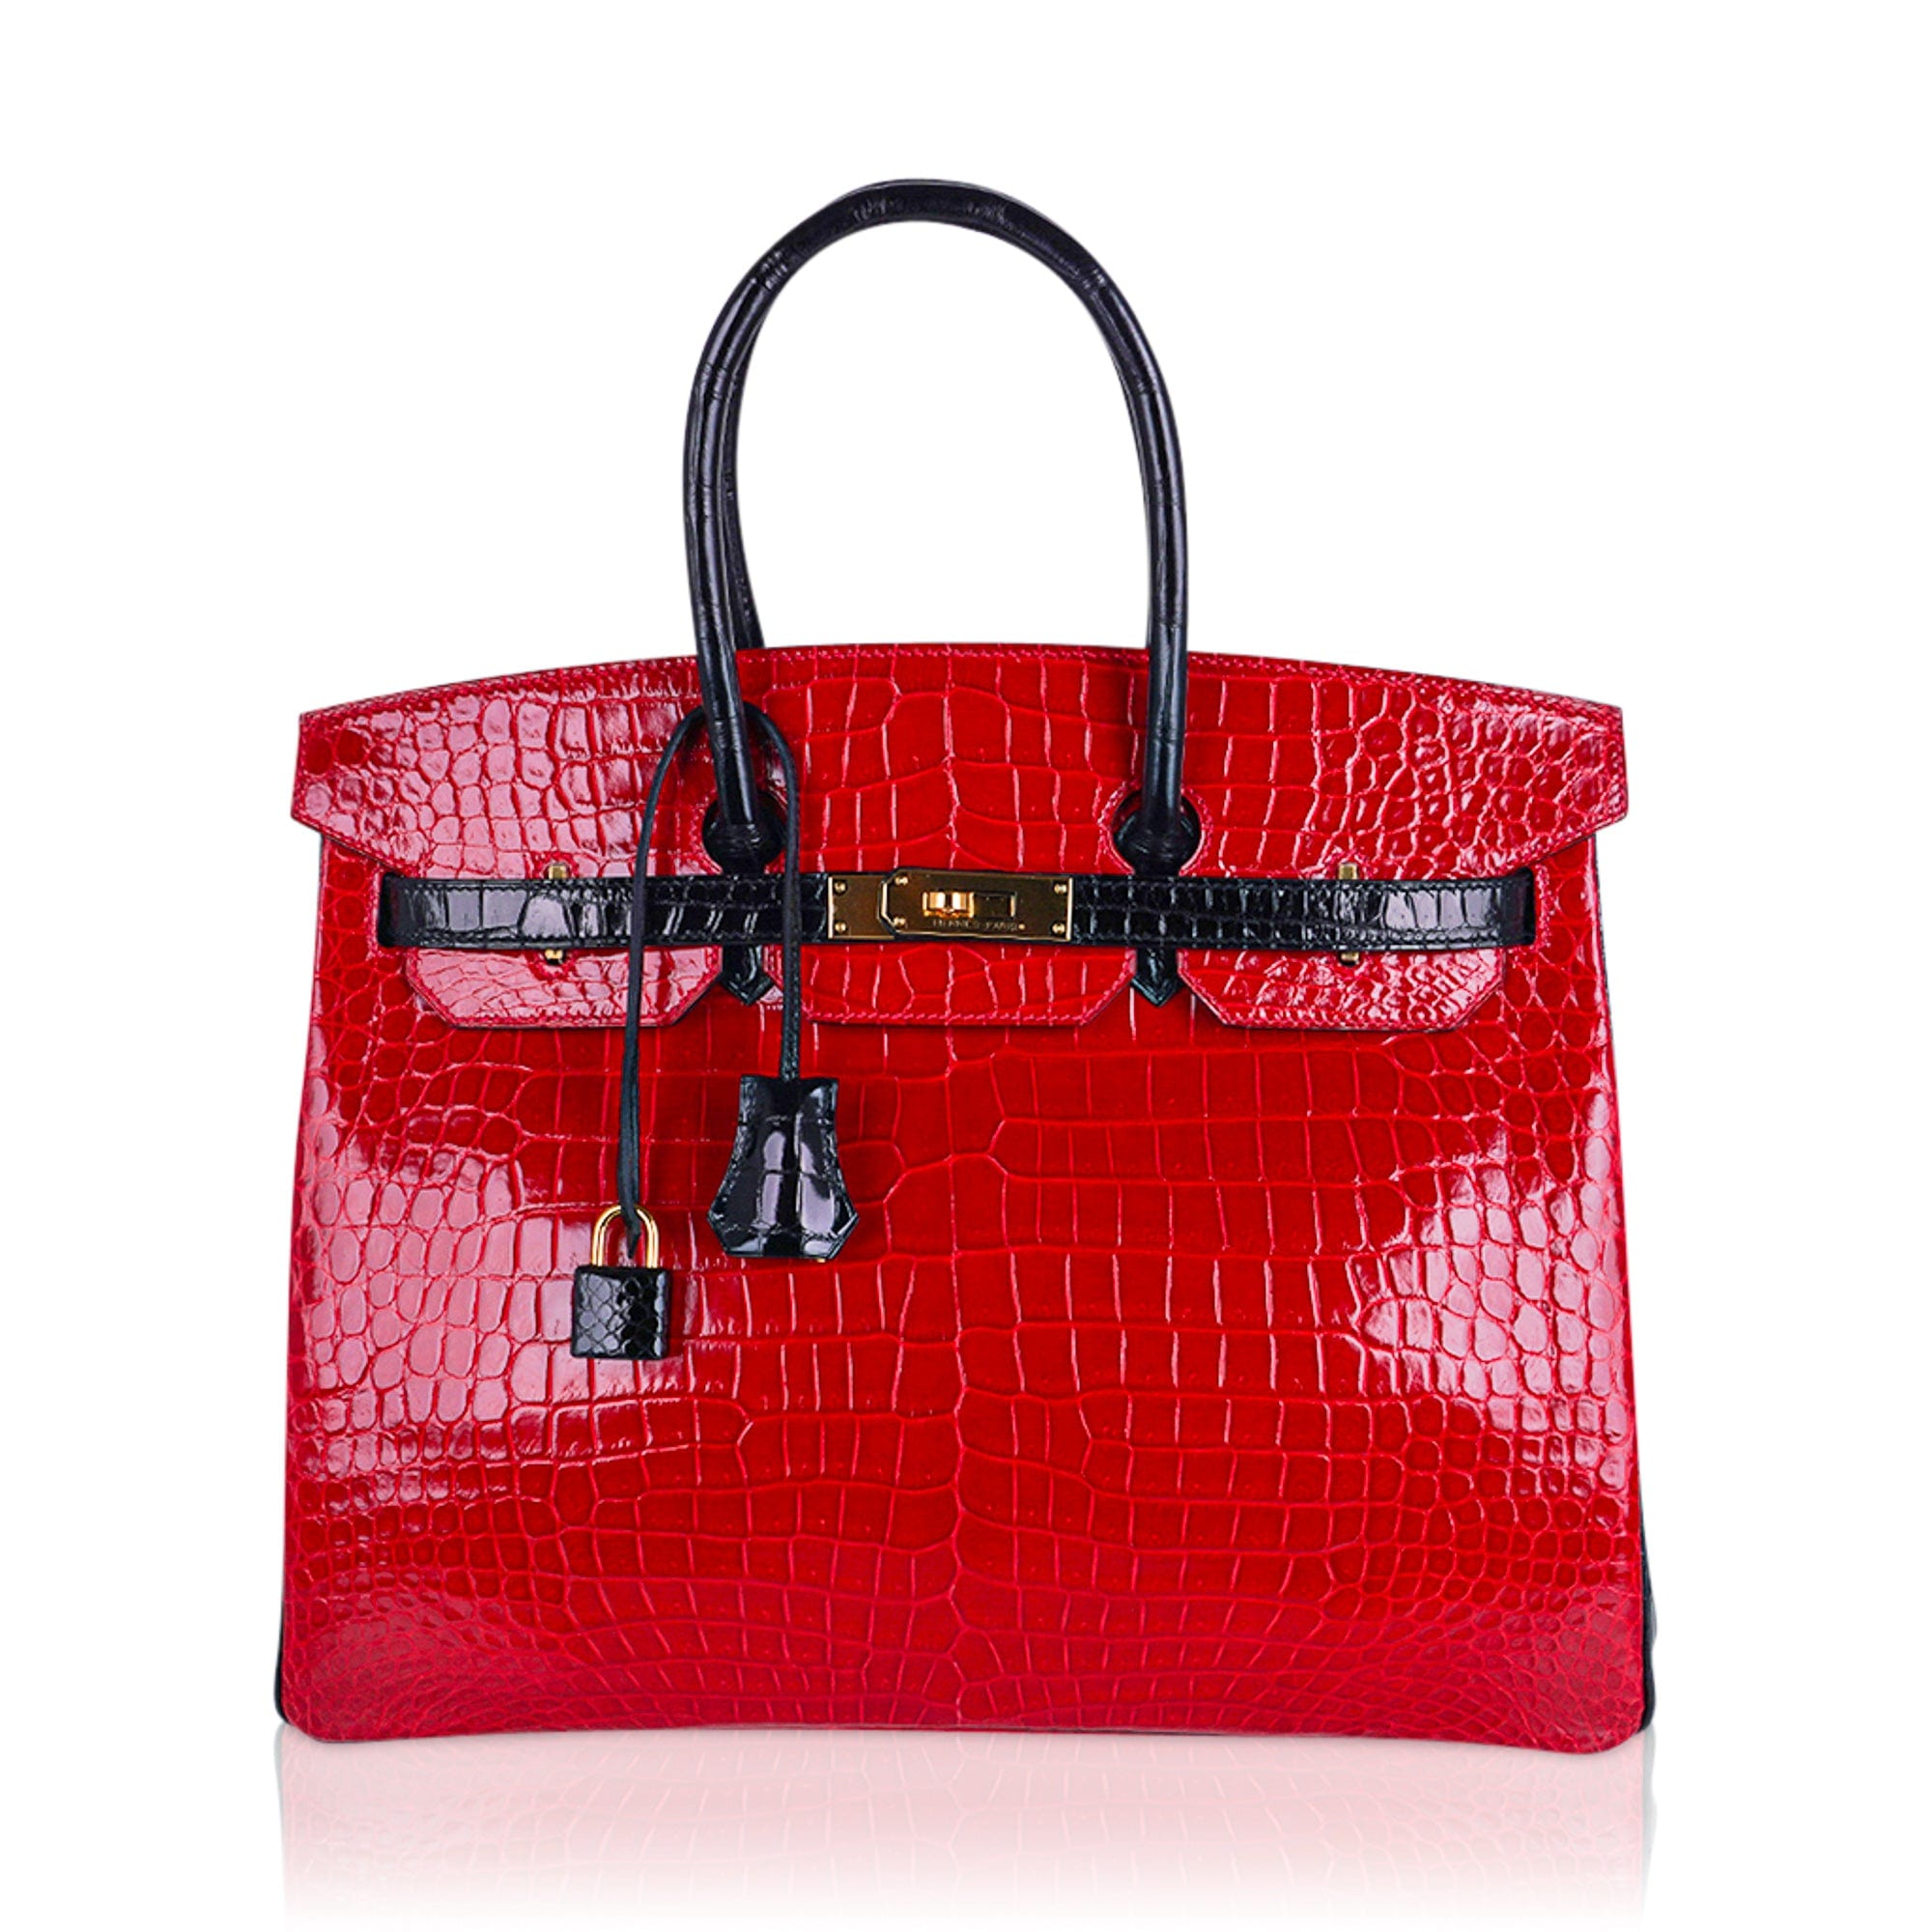 Hermes Limited Edition Birkin 35 Bag 5P Pink Matte Alligator with Pall –  Mightychic